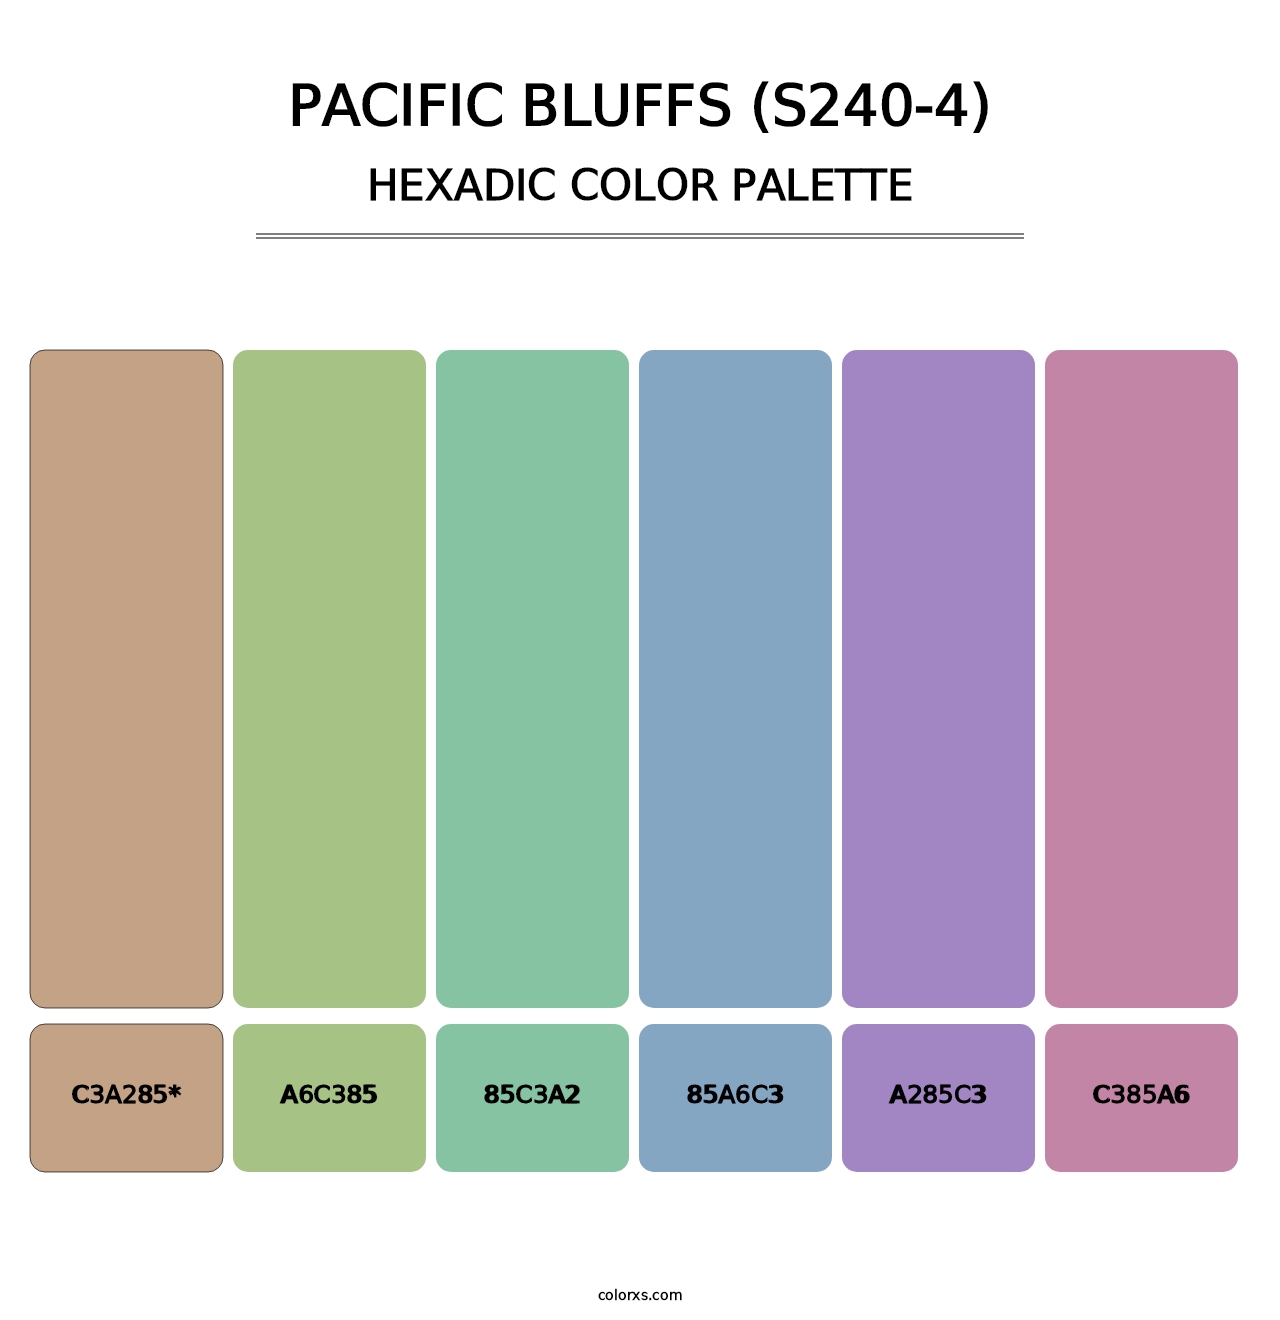 Pacific Bluffs (S240-4) - Hexadic Color Palette